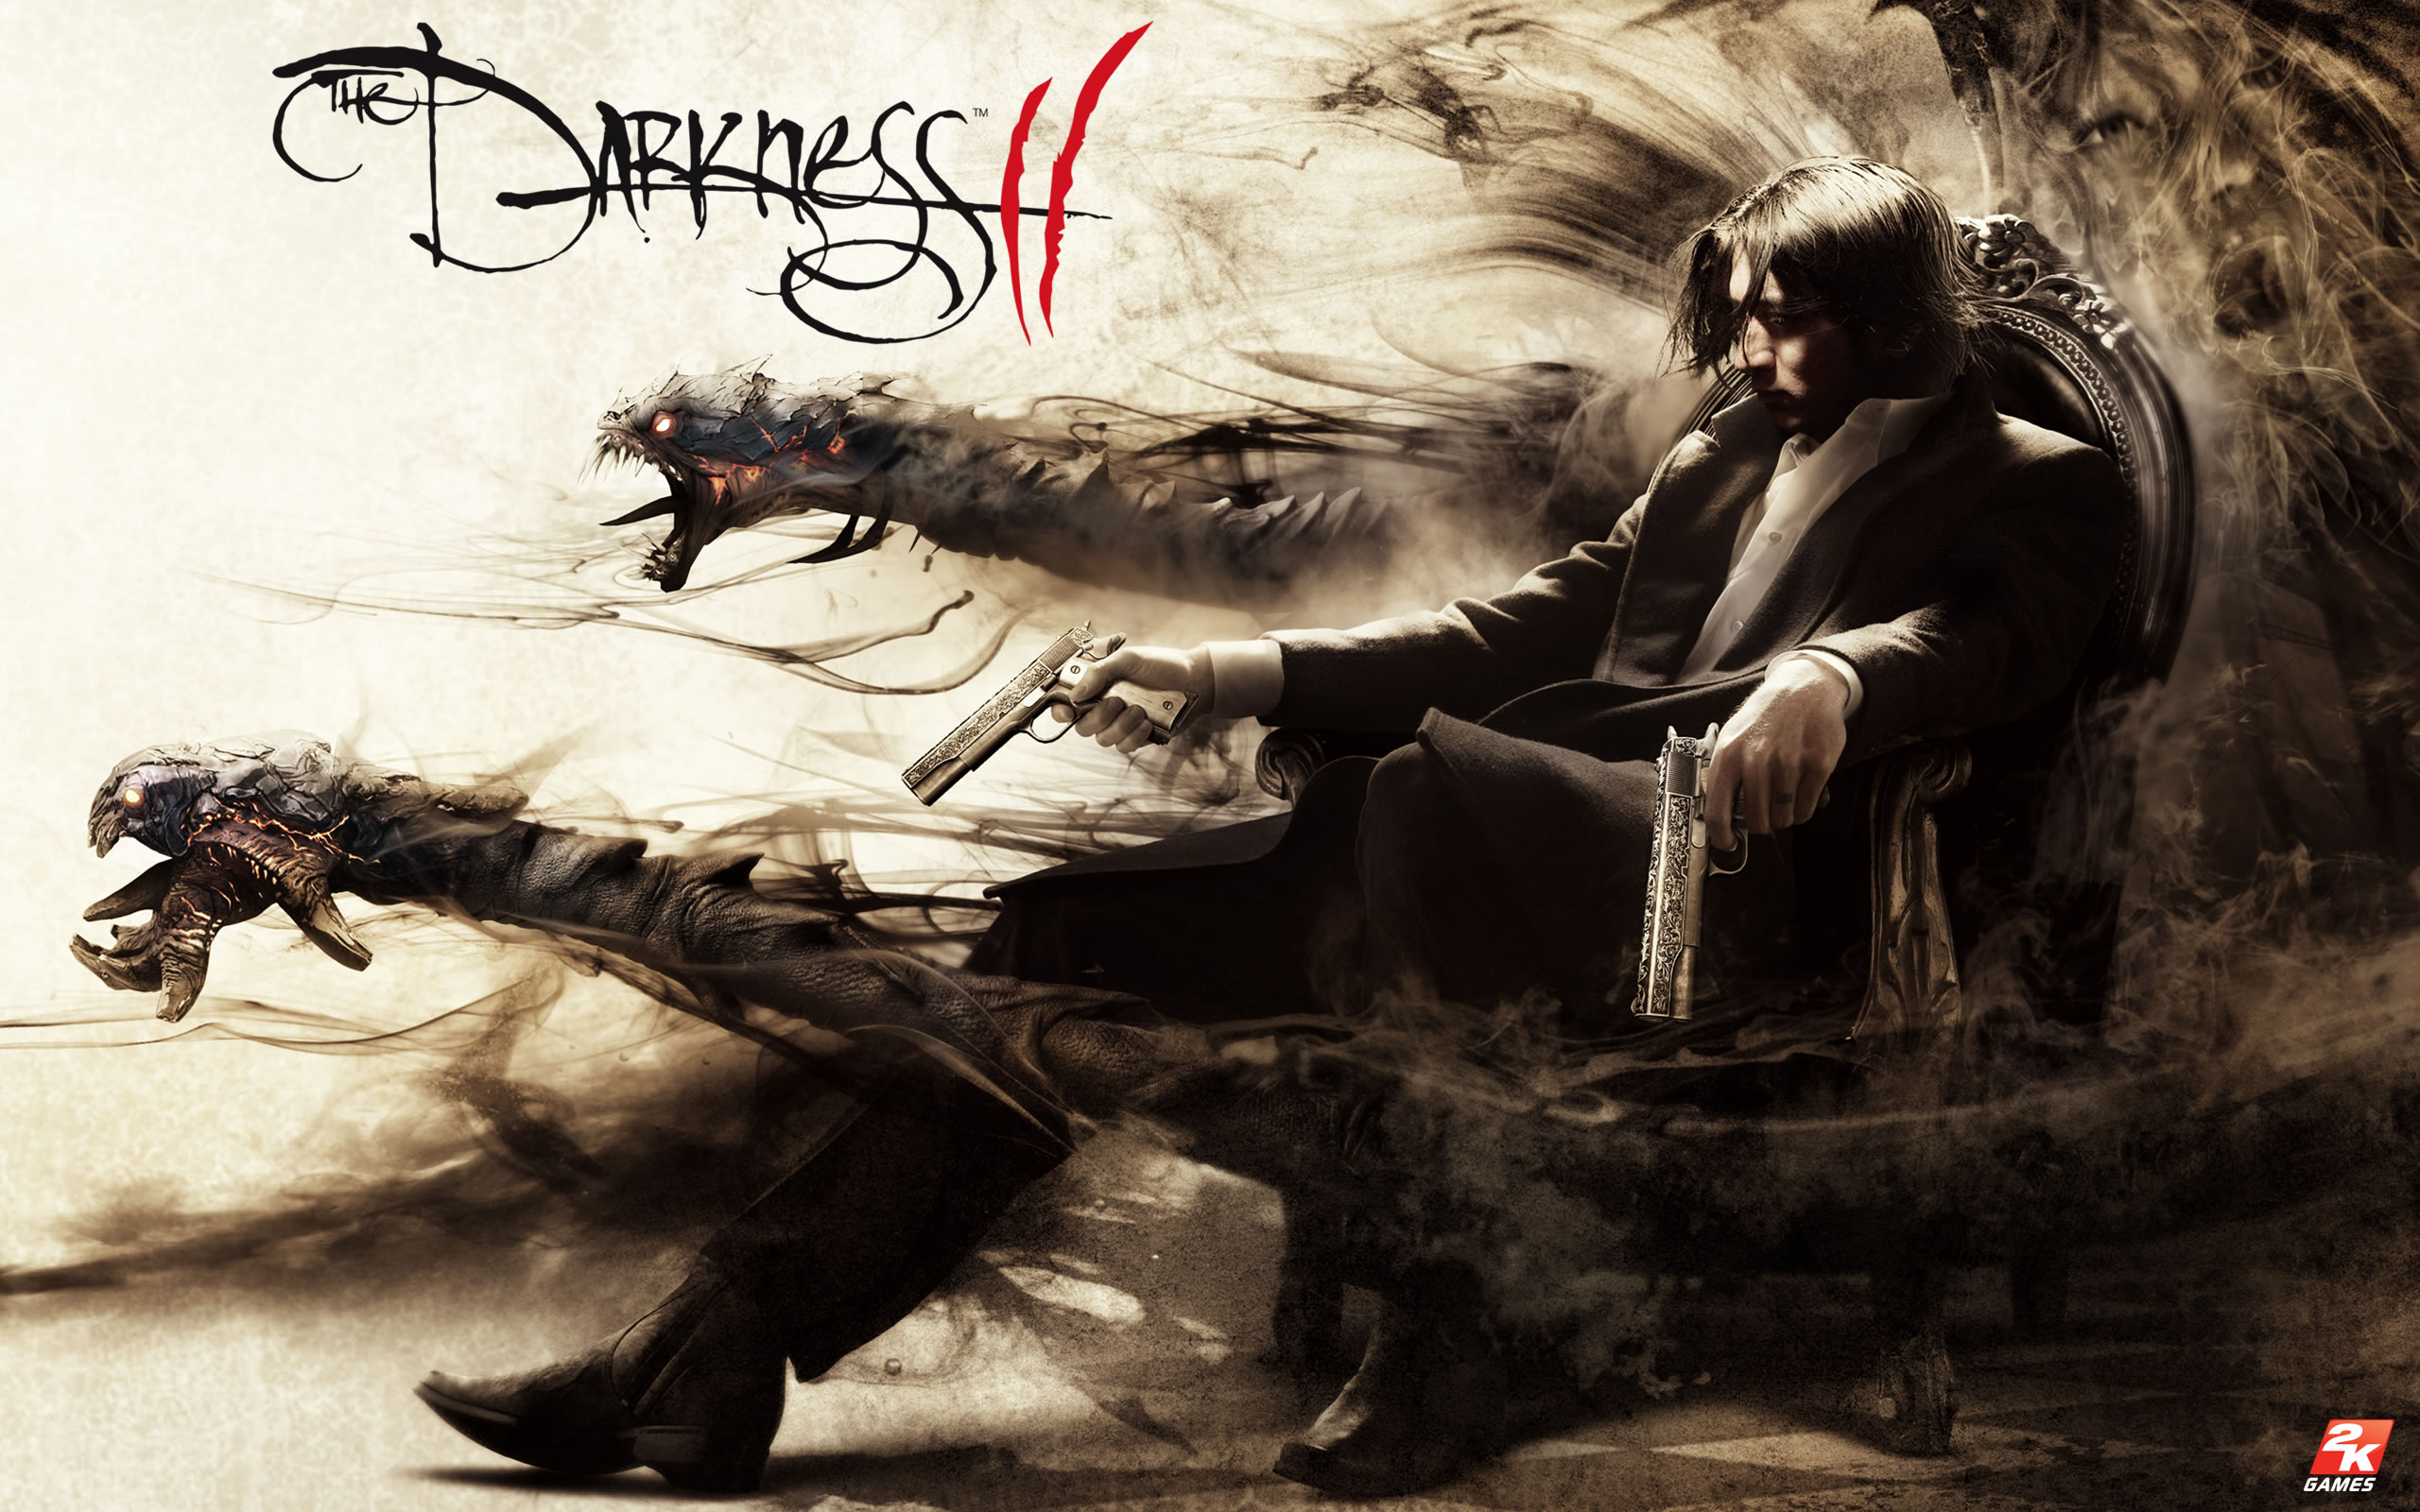 the darkness ii, black hair, video game, creature, darkness ii, gun, weapon, the darkness